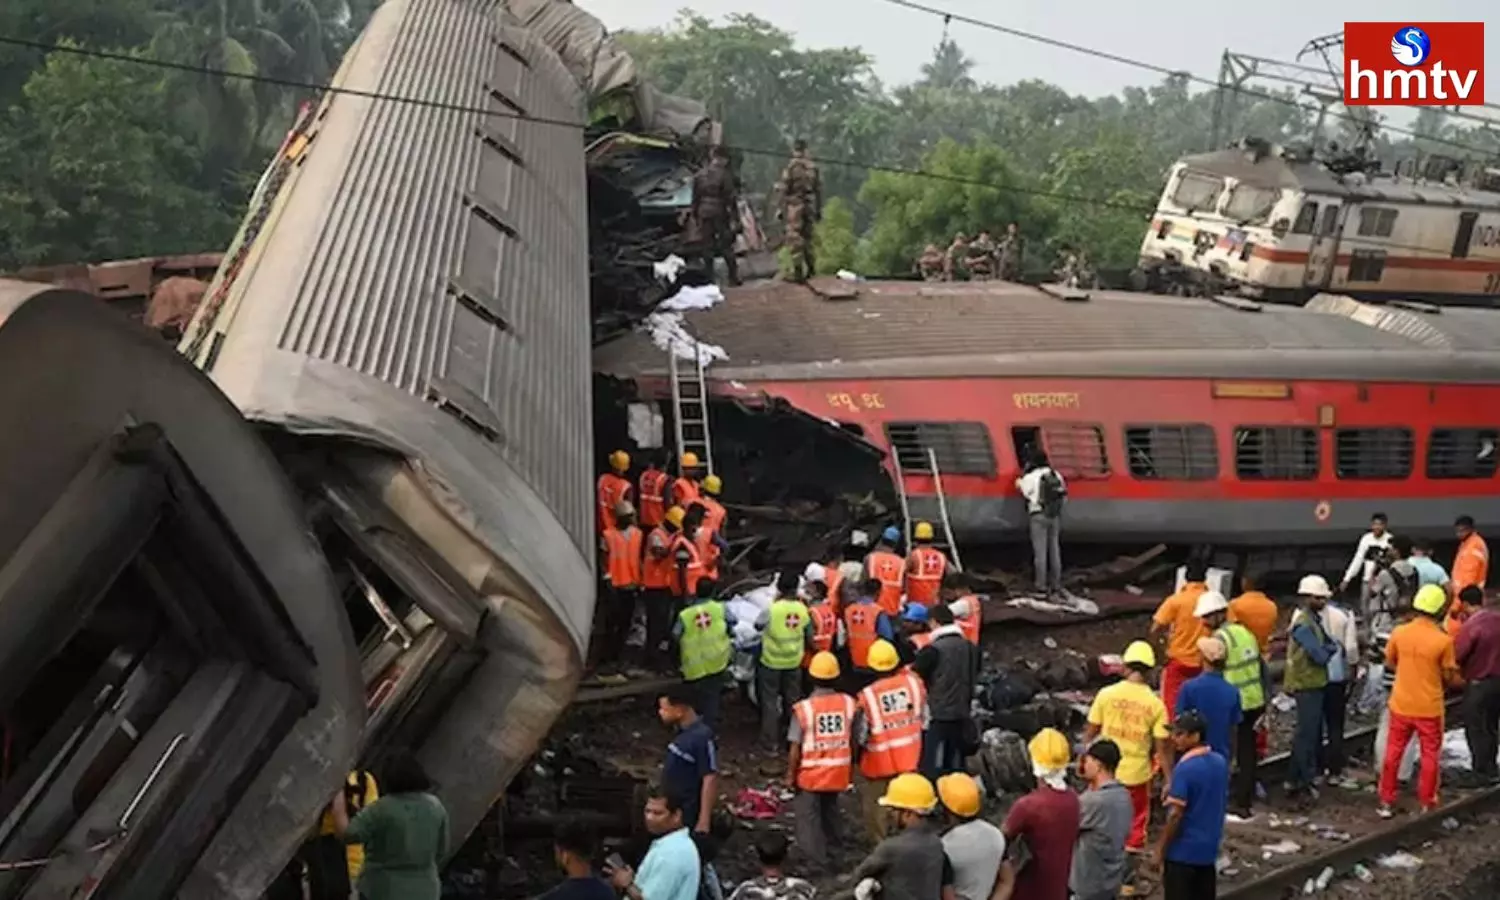 40 People died Due to Electric Shock in Odisha Train Tragedy